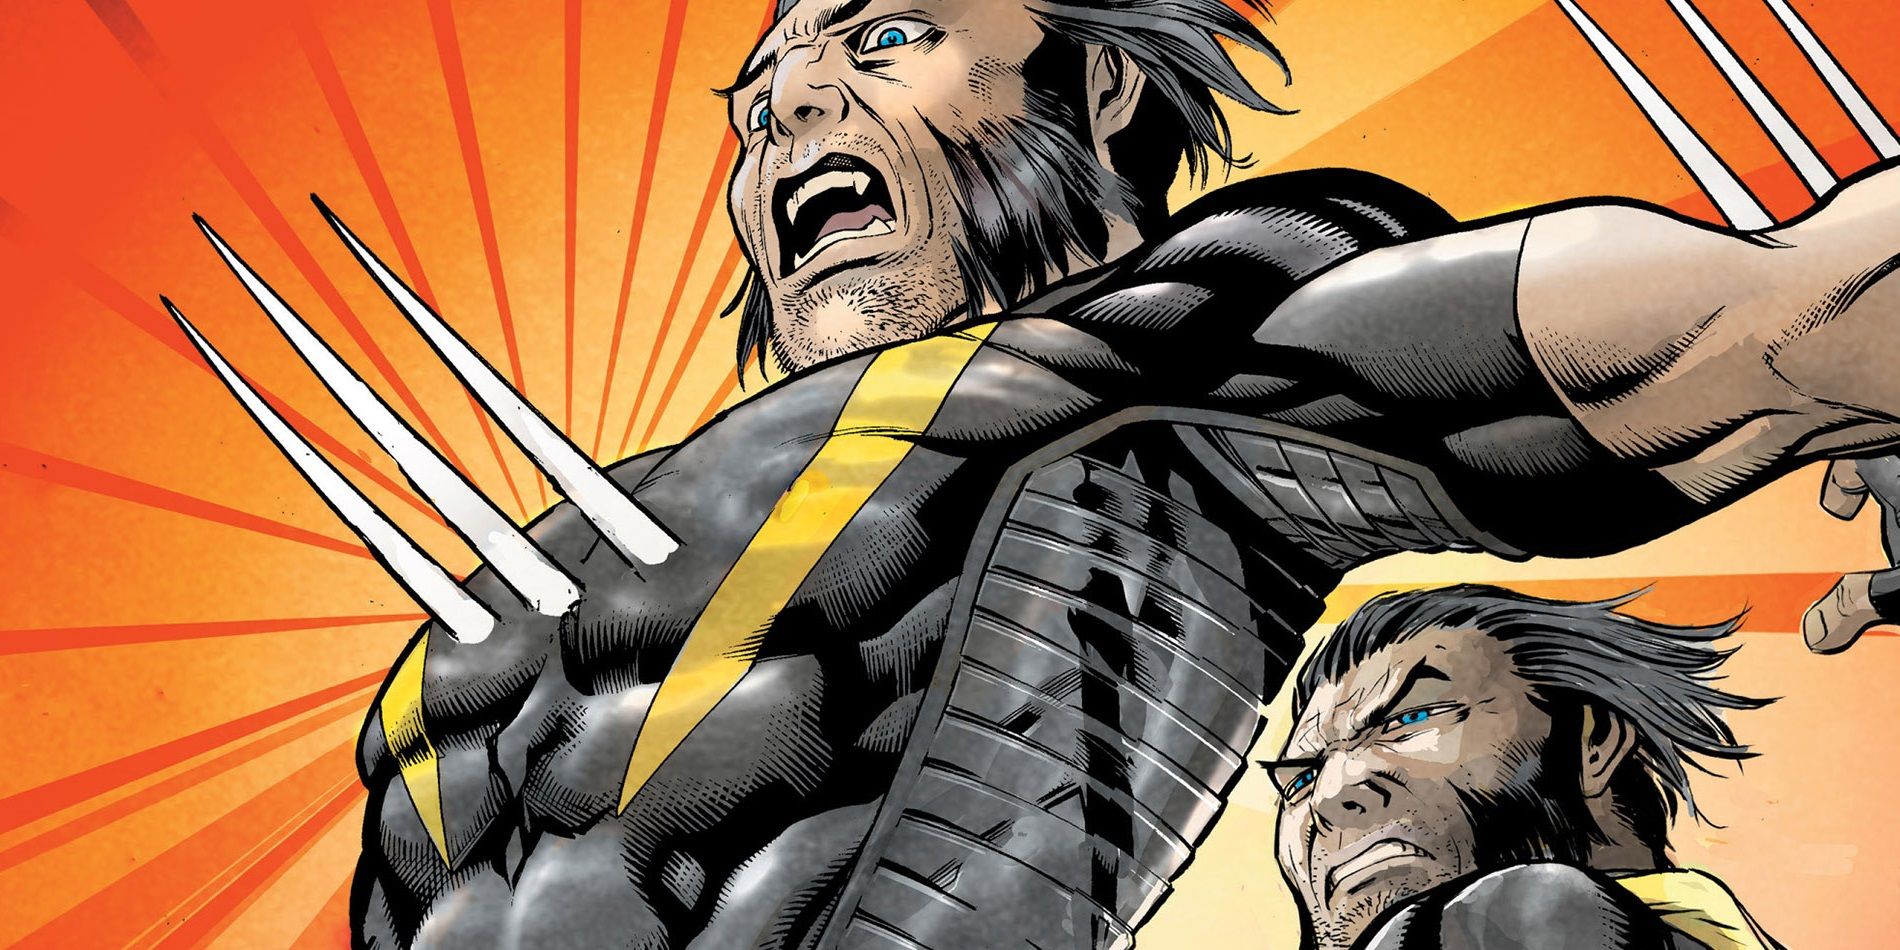 Wolverine impales Wolverine with his claws during the Age of Ultron in Marvel Comics.